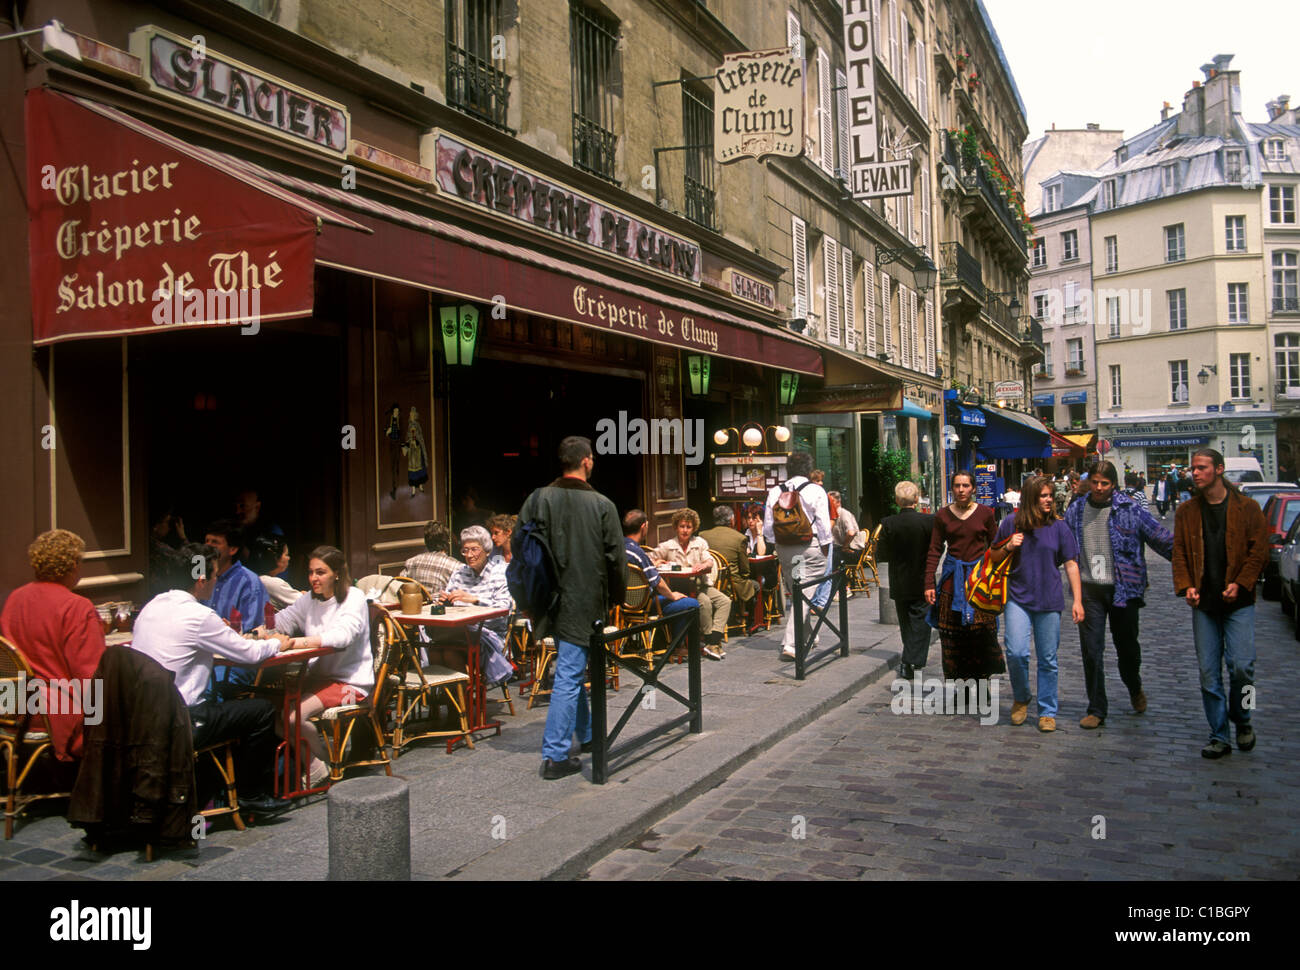 people, tourists, eating, Creperie de Cluny, French restaurant, French food and drink, food and drink, Saint-Michel, Paris, Ile-de-France, France Stock Photo